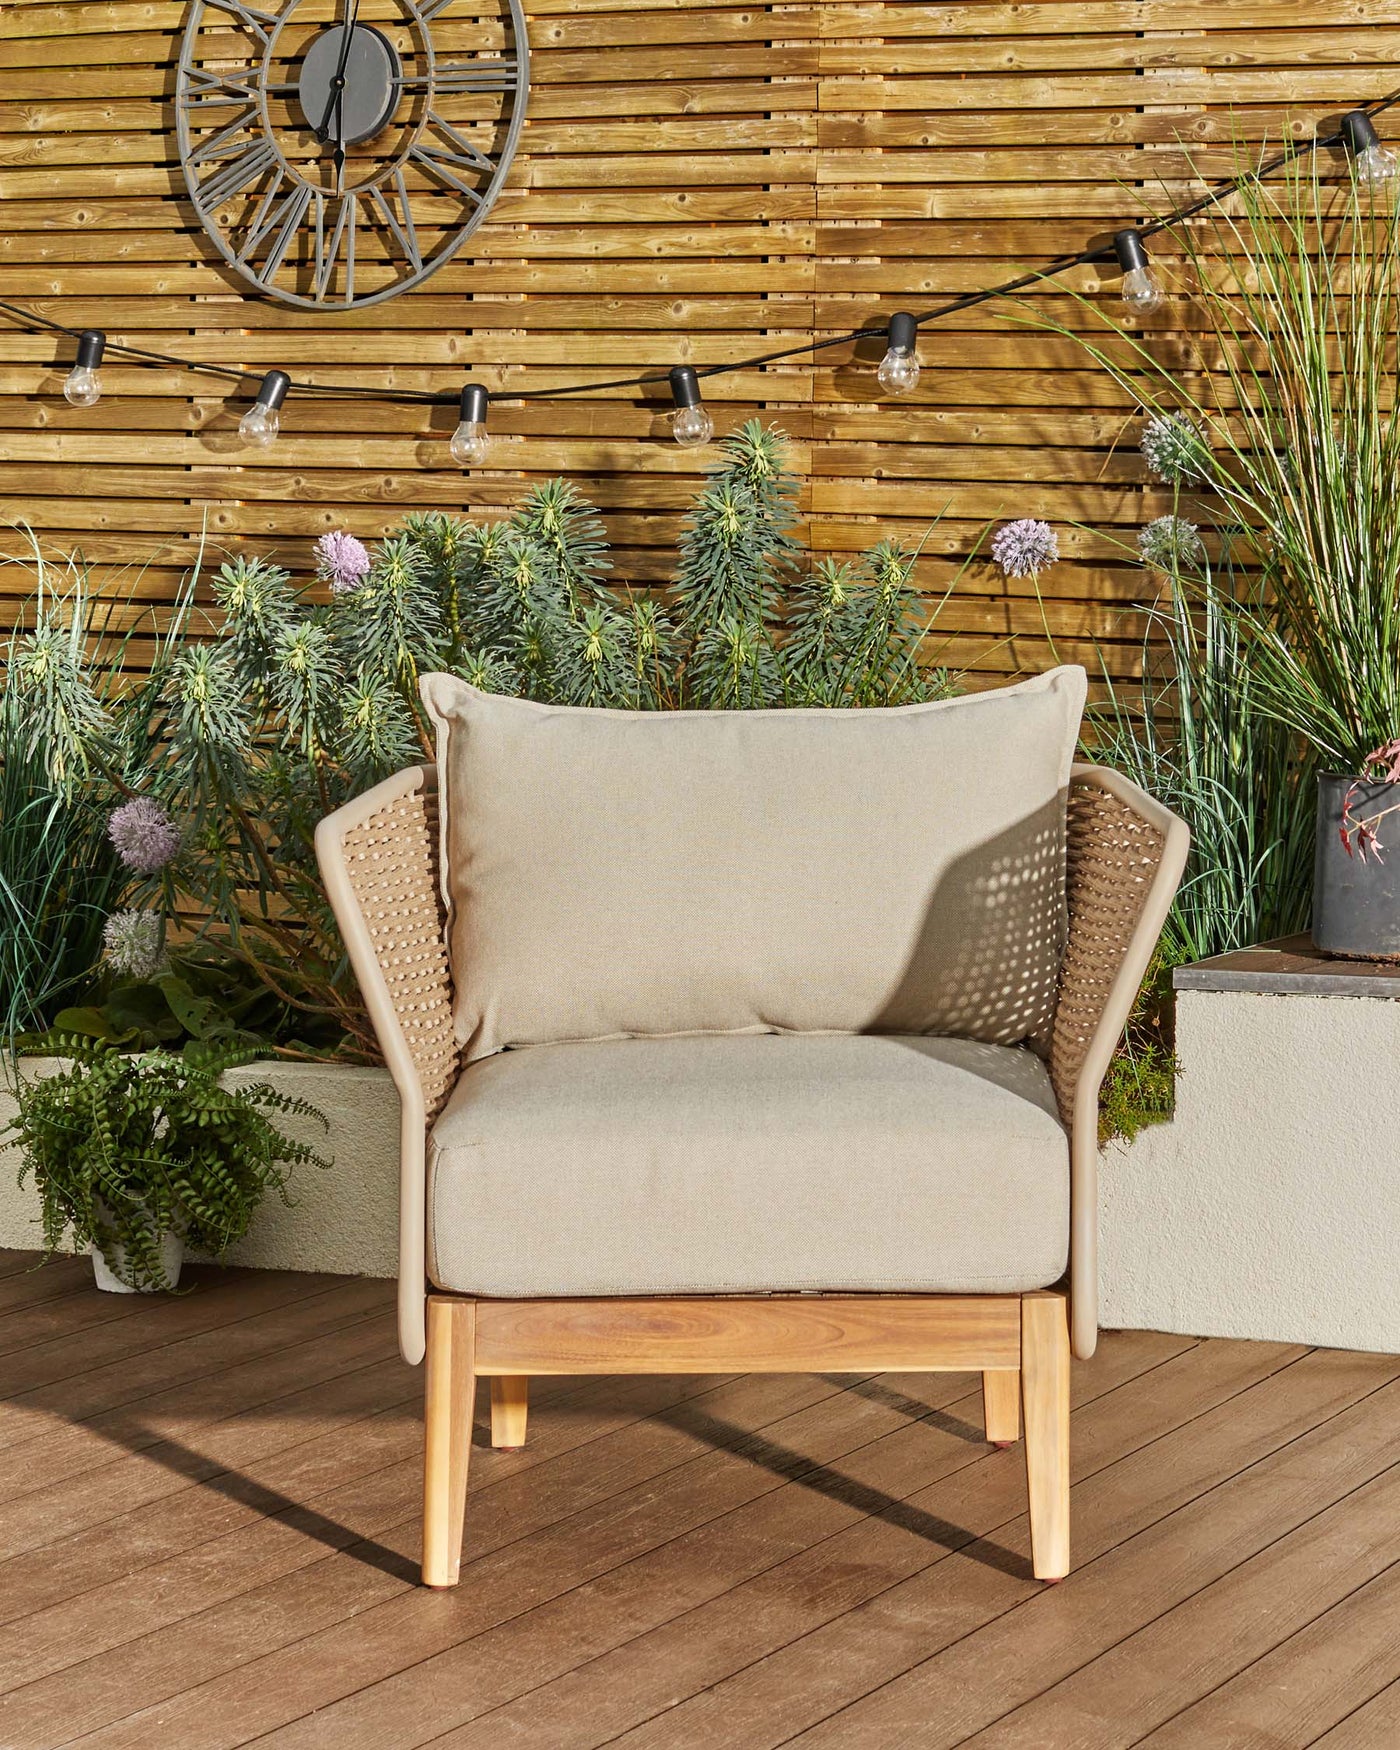 Tuscany Natural wood and rope armchair